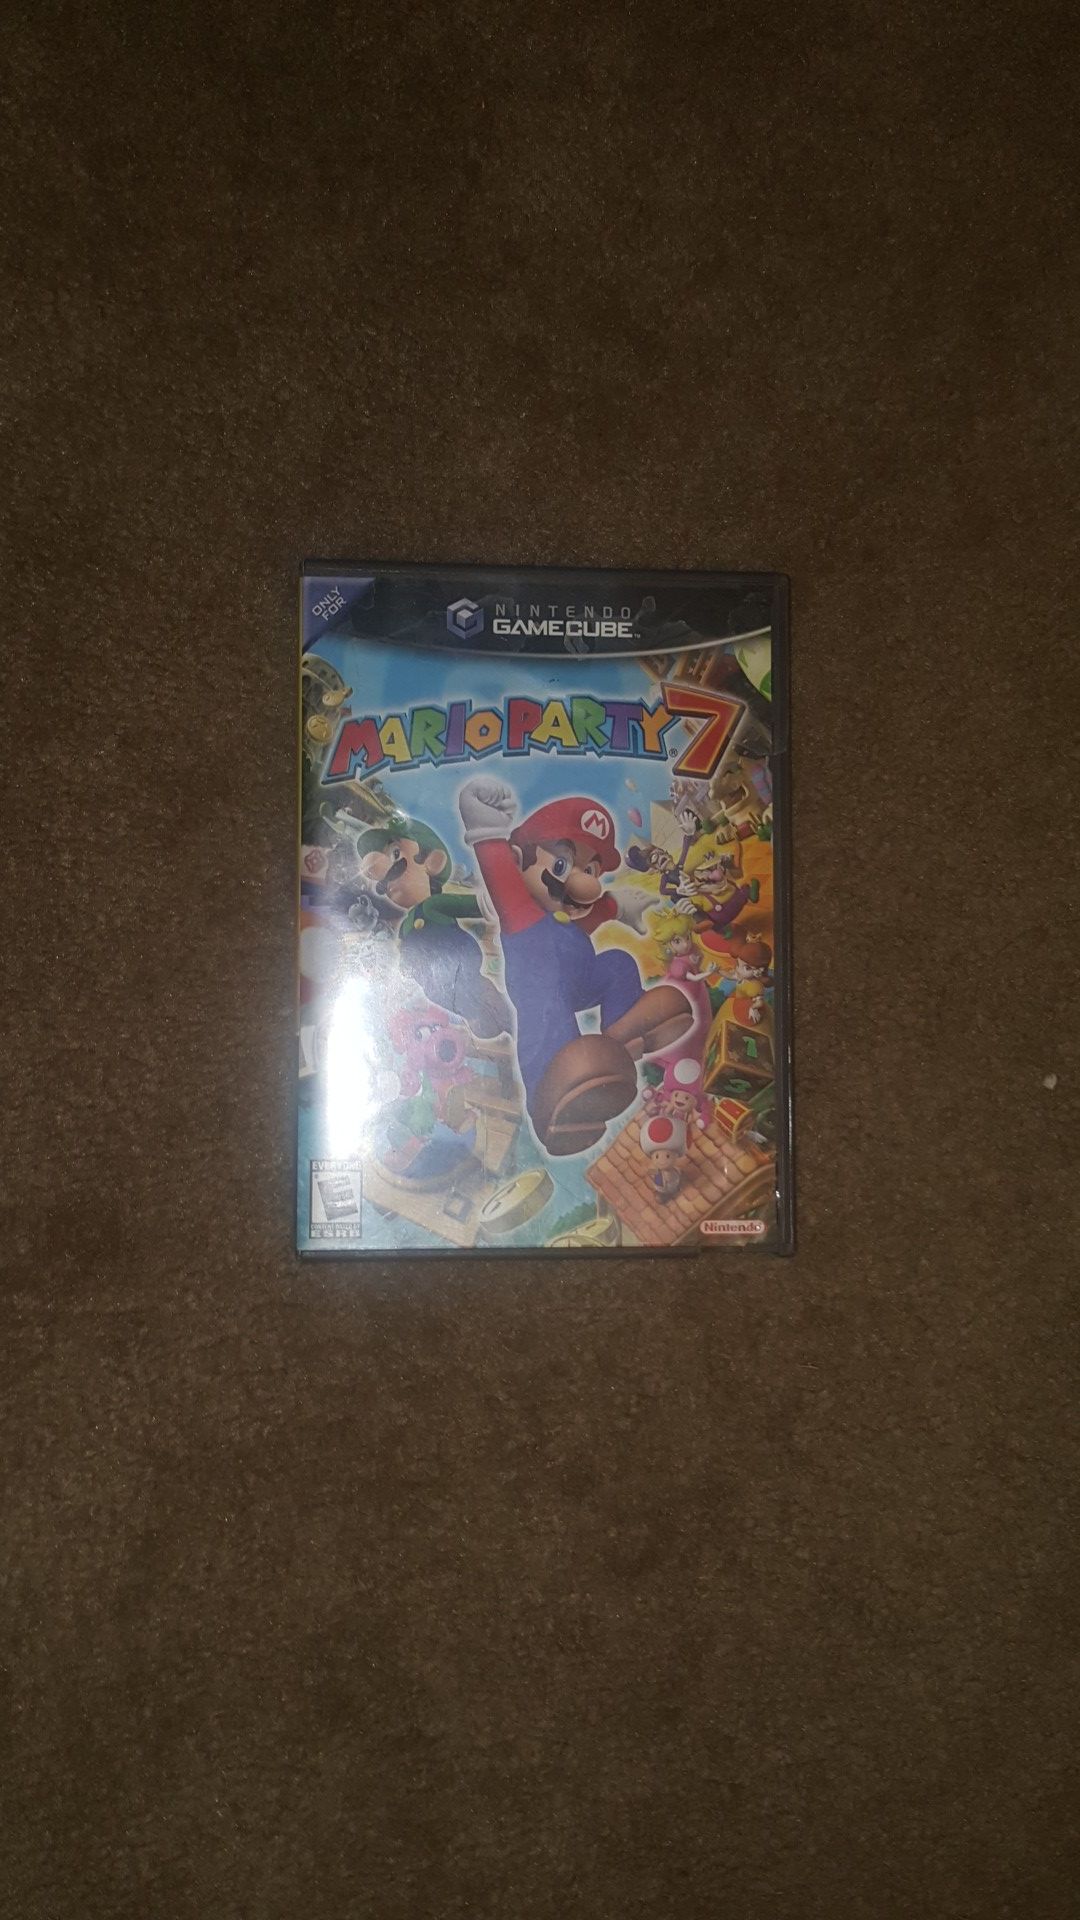 Mario Party 7 for the GameCube and WII (2005)